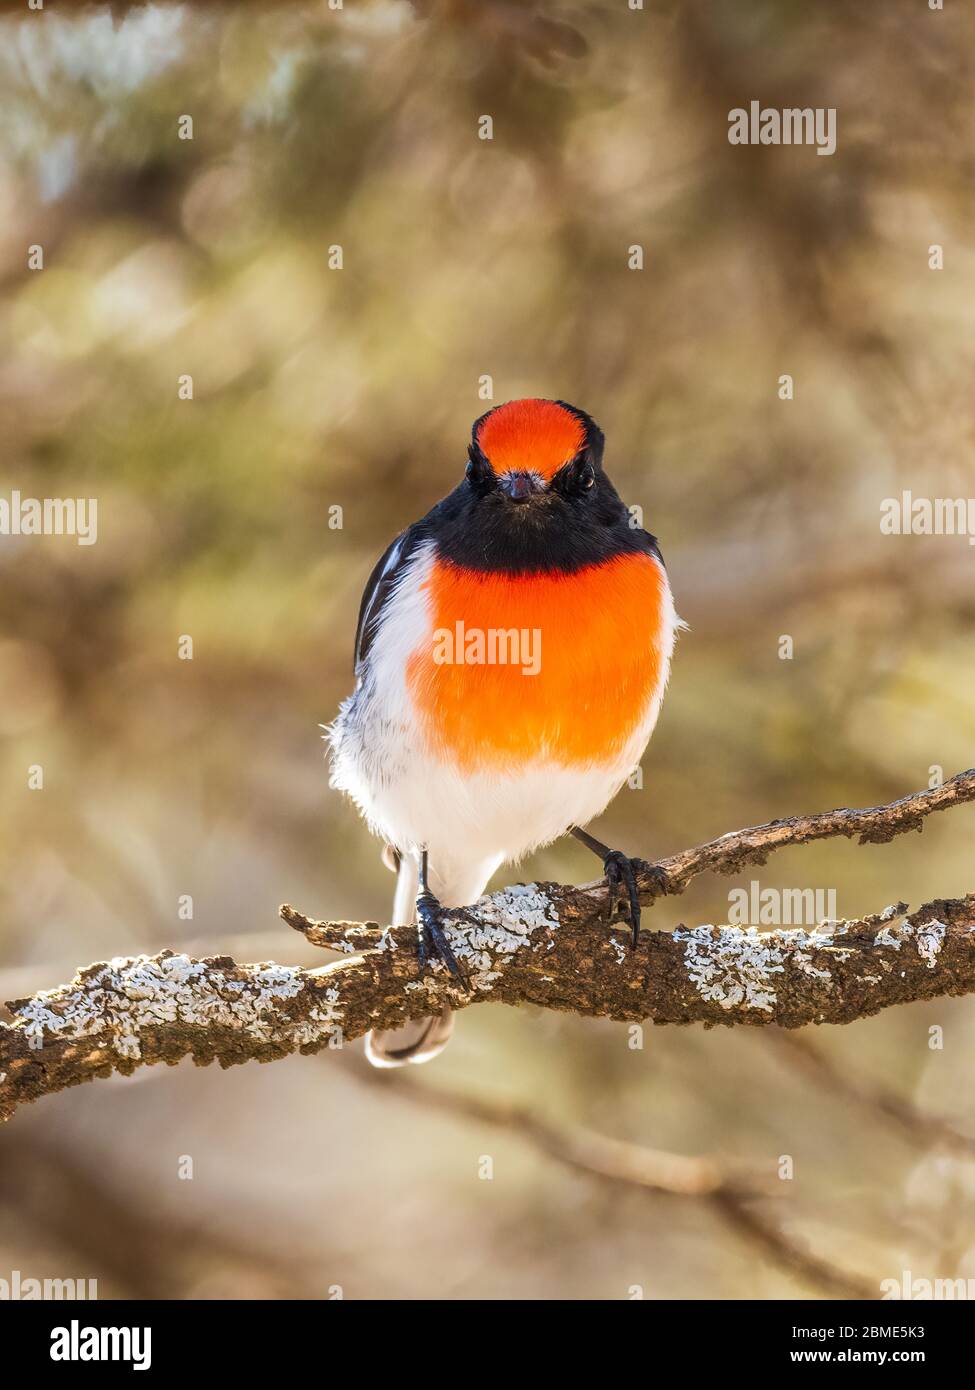 The Red-capped Robin (Petroica goodenovi) is the smallest red robin. The male Red-capped Robin has a unique red cap. Stock Photo